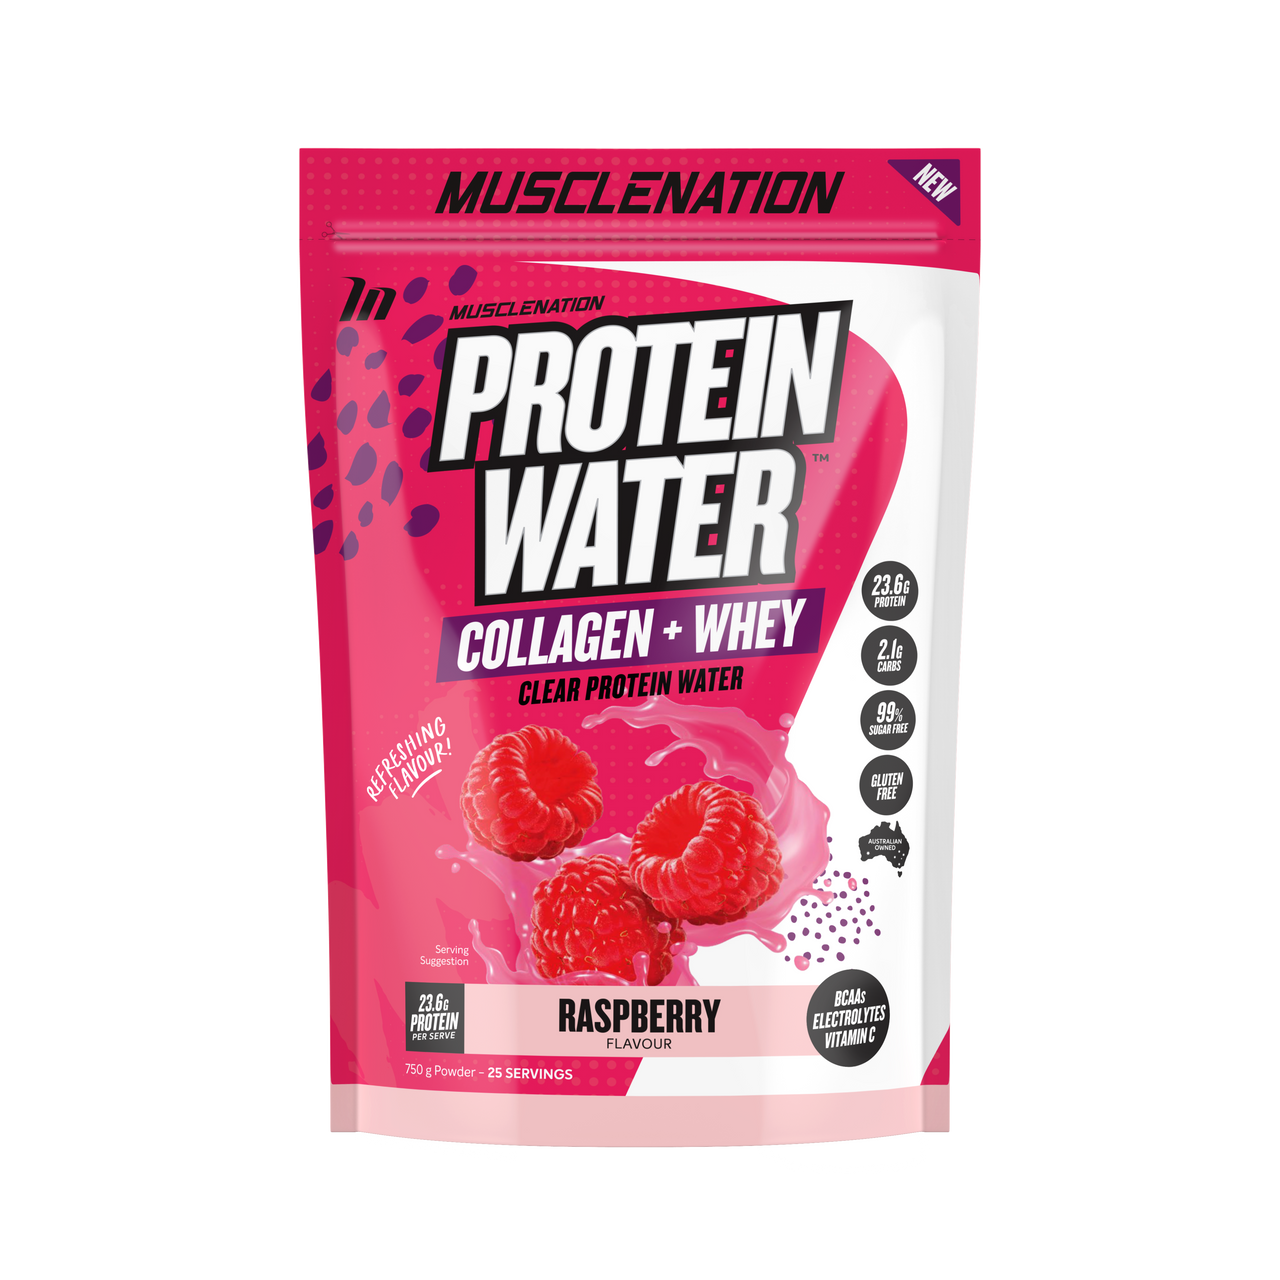 Muscle Nation Protein Water - Super Nutrition